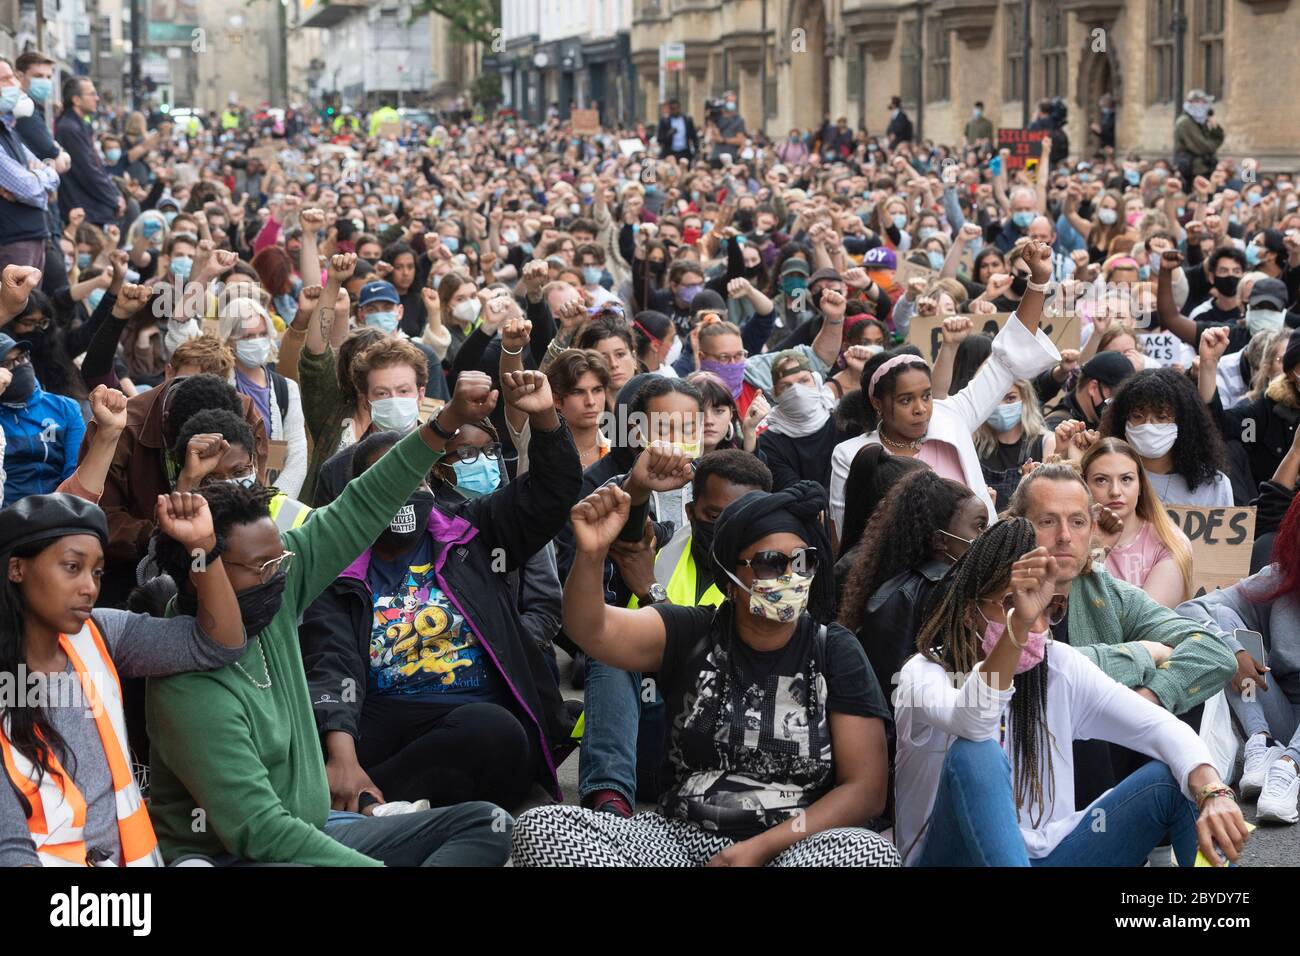 Oxford. 9th June, 2020. Demonstrators take part in a protest demanding Oxford University to remove the statue of Cecil Rhodes outside Oriel College in Oxford, Britain on June 9, 2020. According to local media, hundreds of Black Lives Matter protesters gathered in Oxford to call for a statue of Cecil Rhodes to be pulled down, following the toppling of a statue of 17th-century slave trader Edward Colston during a protest in Bristol last Sunday. Credit: Ray Tang/Xinhua/Alamy Live News Stock Photo